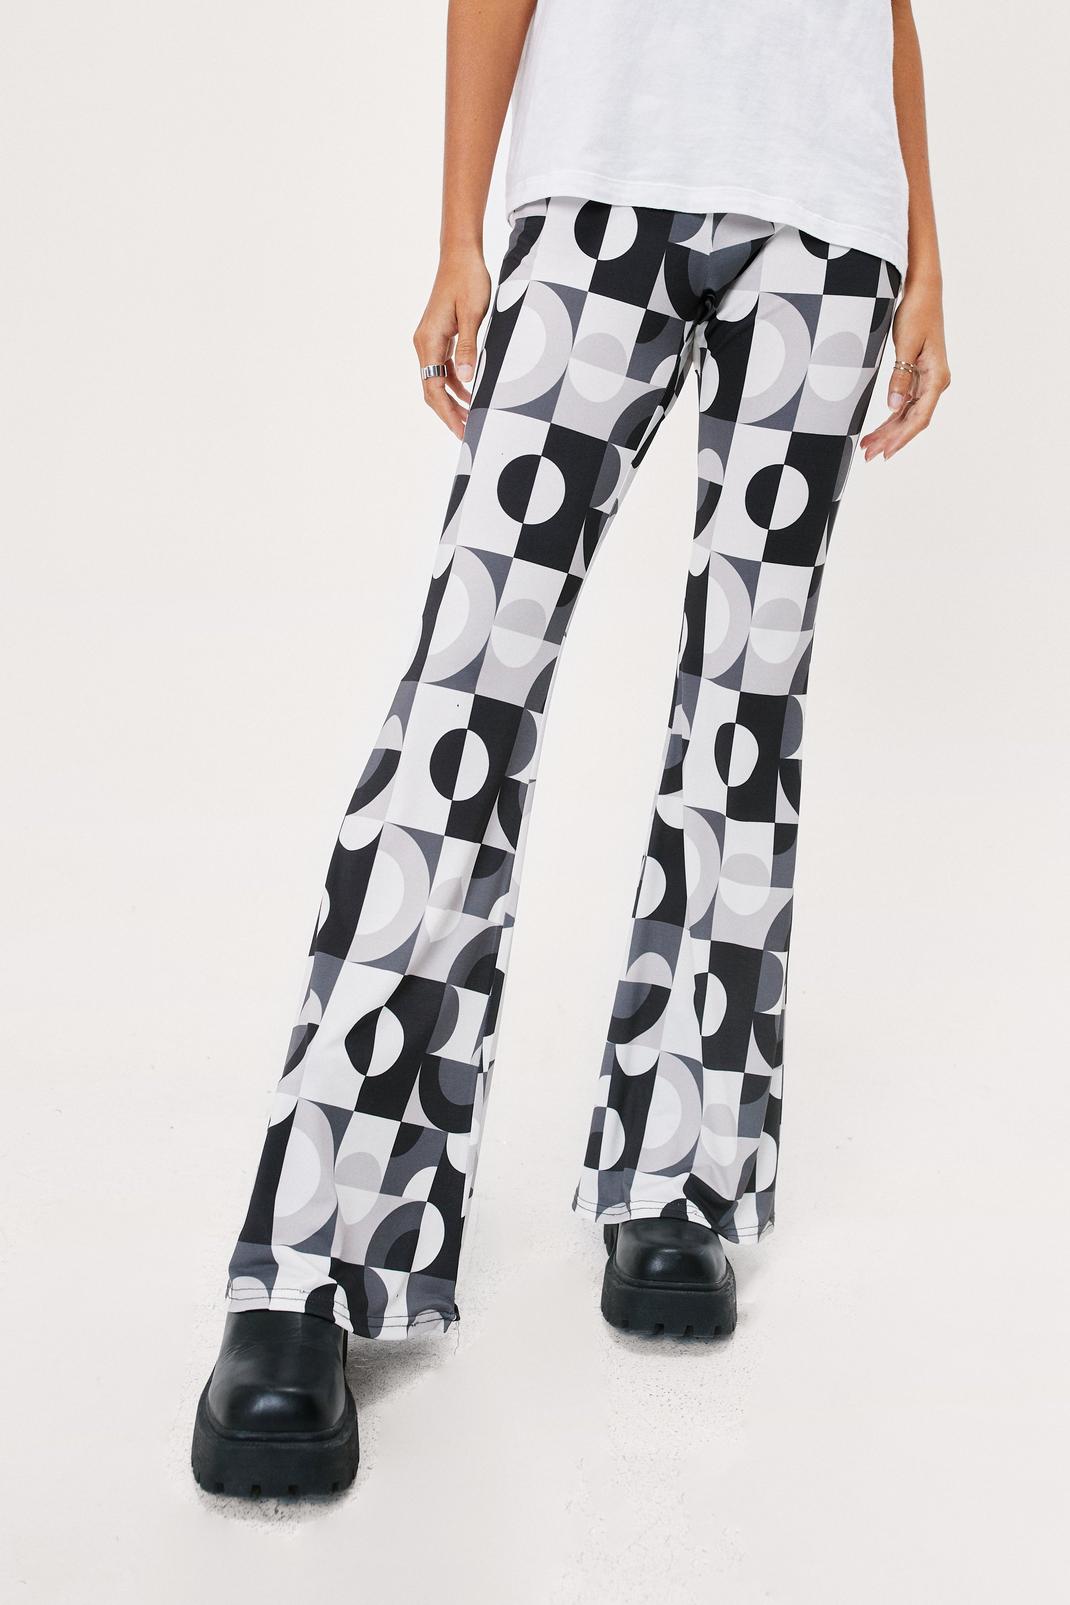 808 Patchwork Retro Print Flared Pants image number 2